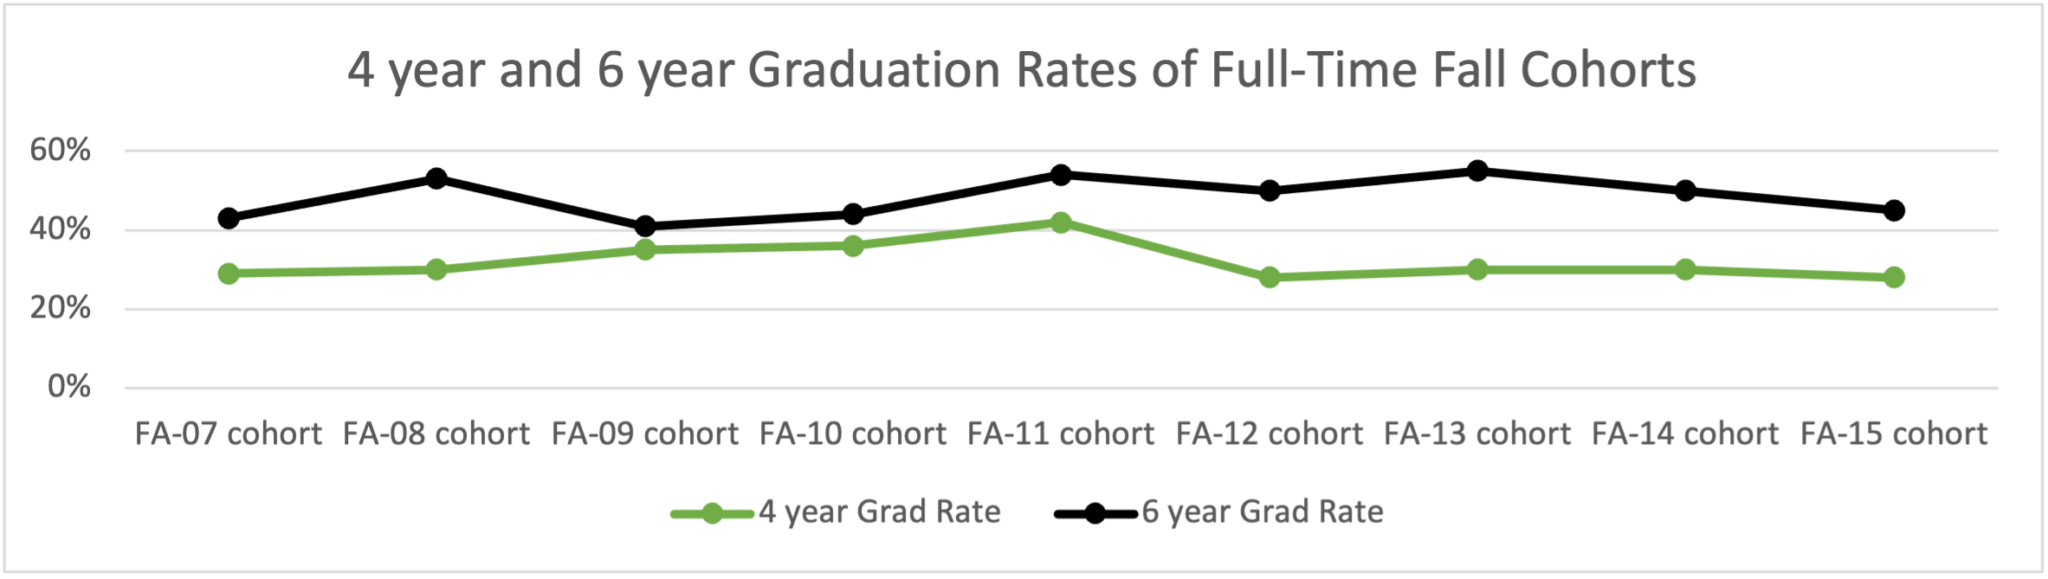 4 year and 6 year graduation rates of full-time fall cohorts line chart